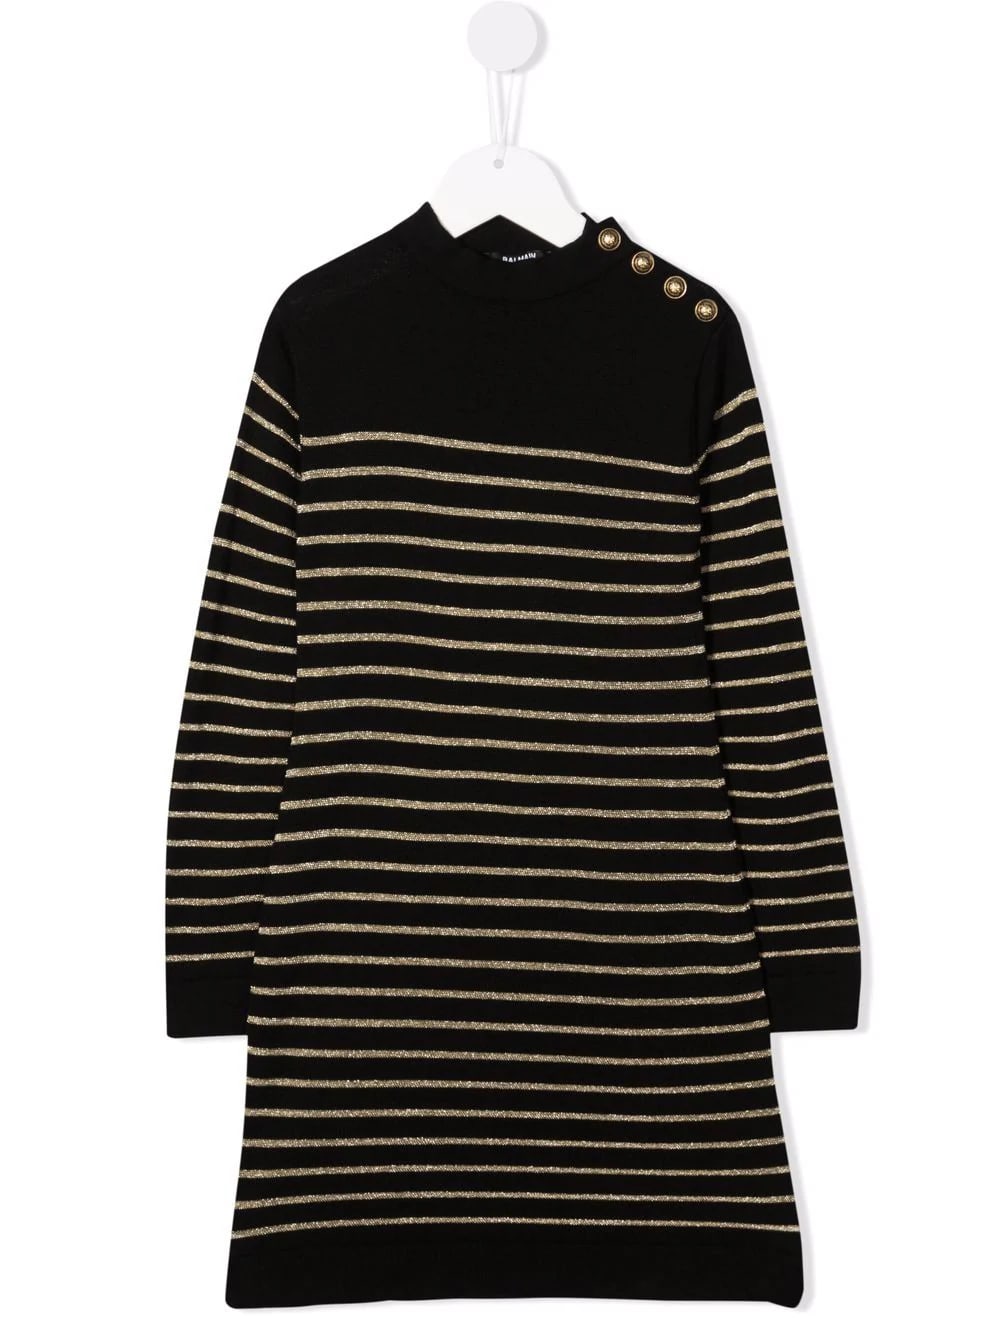 Balmain Kids Dress In Black Knit With Golden Stripes And Embossed Buttons